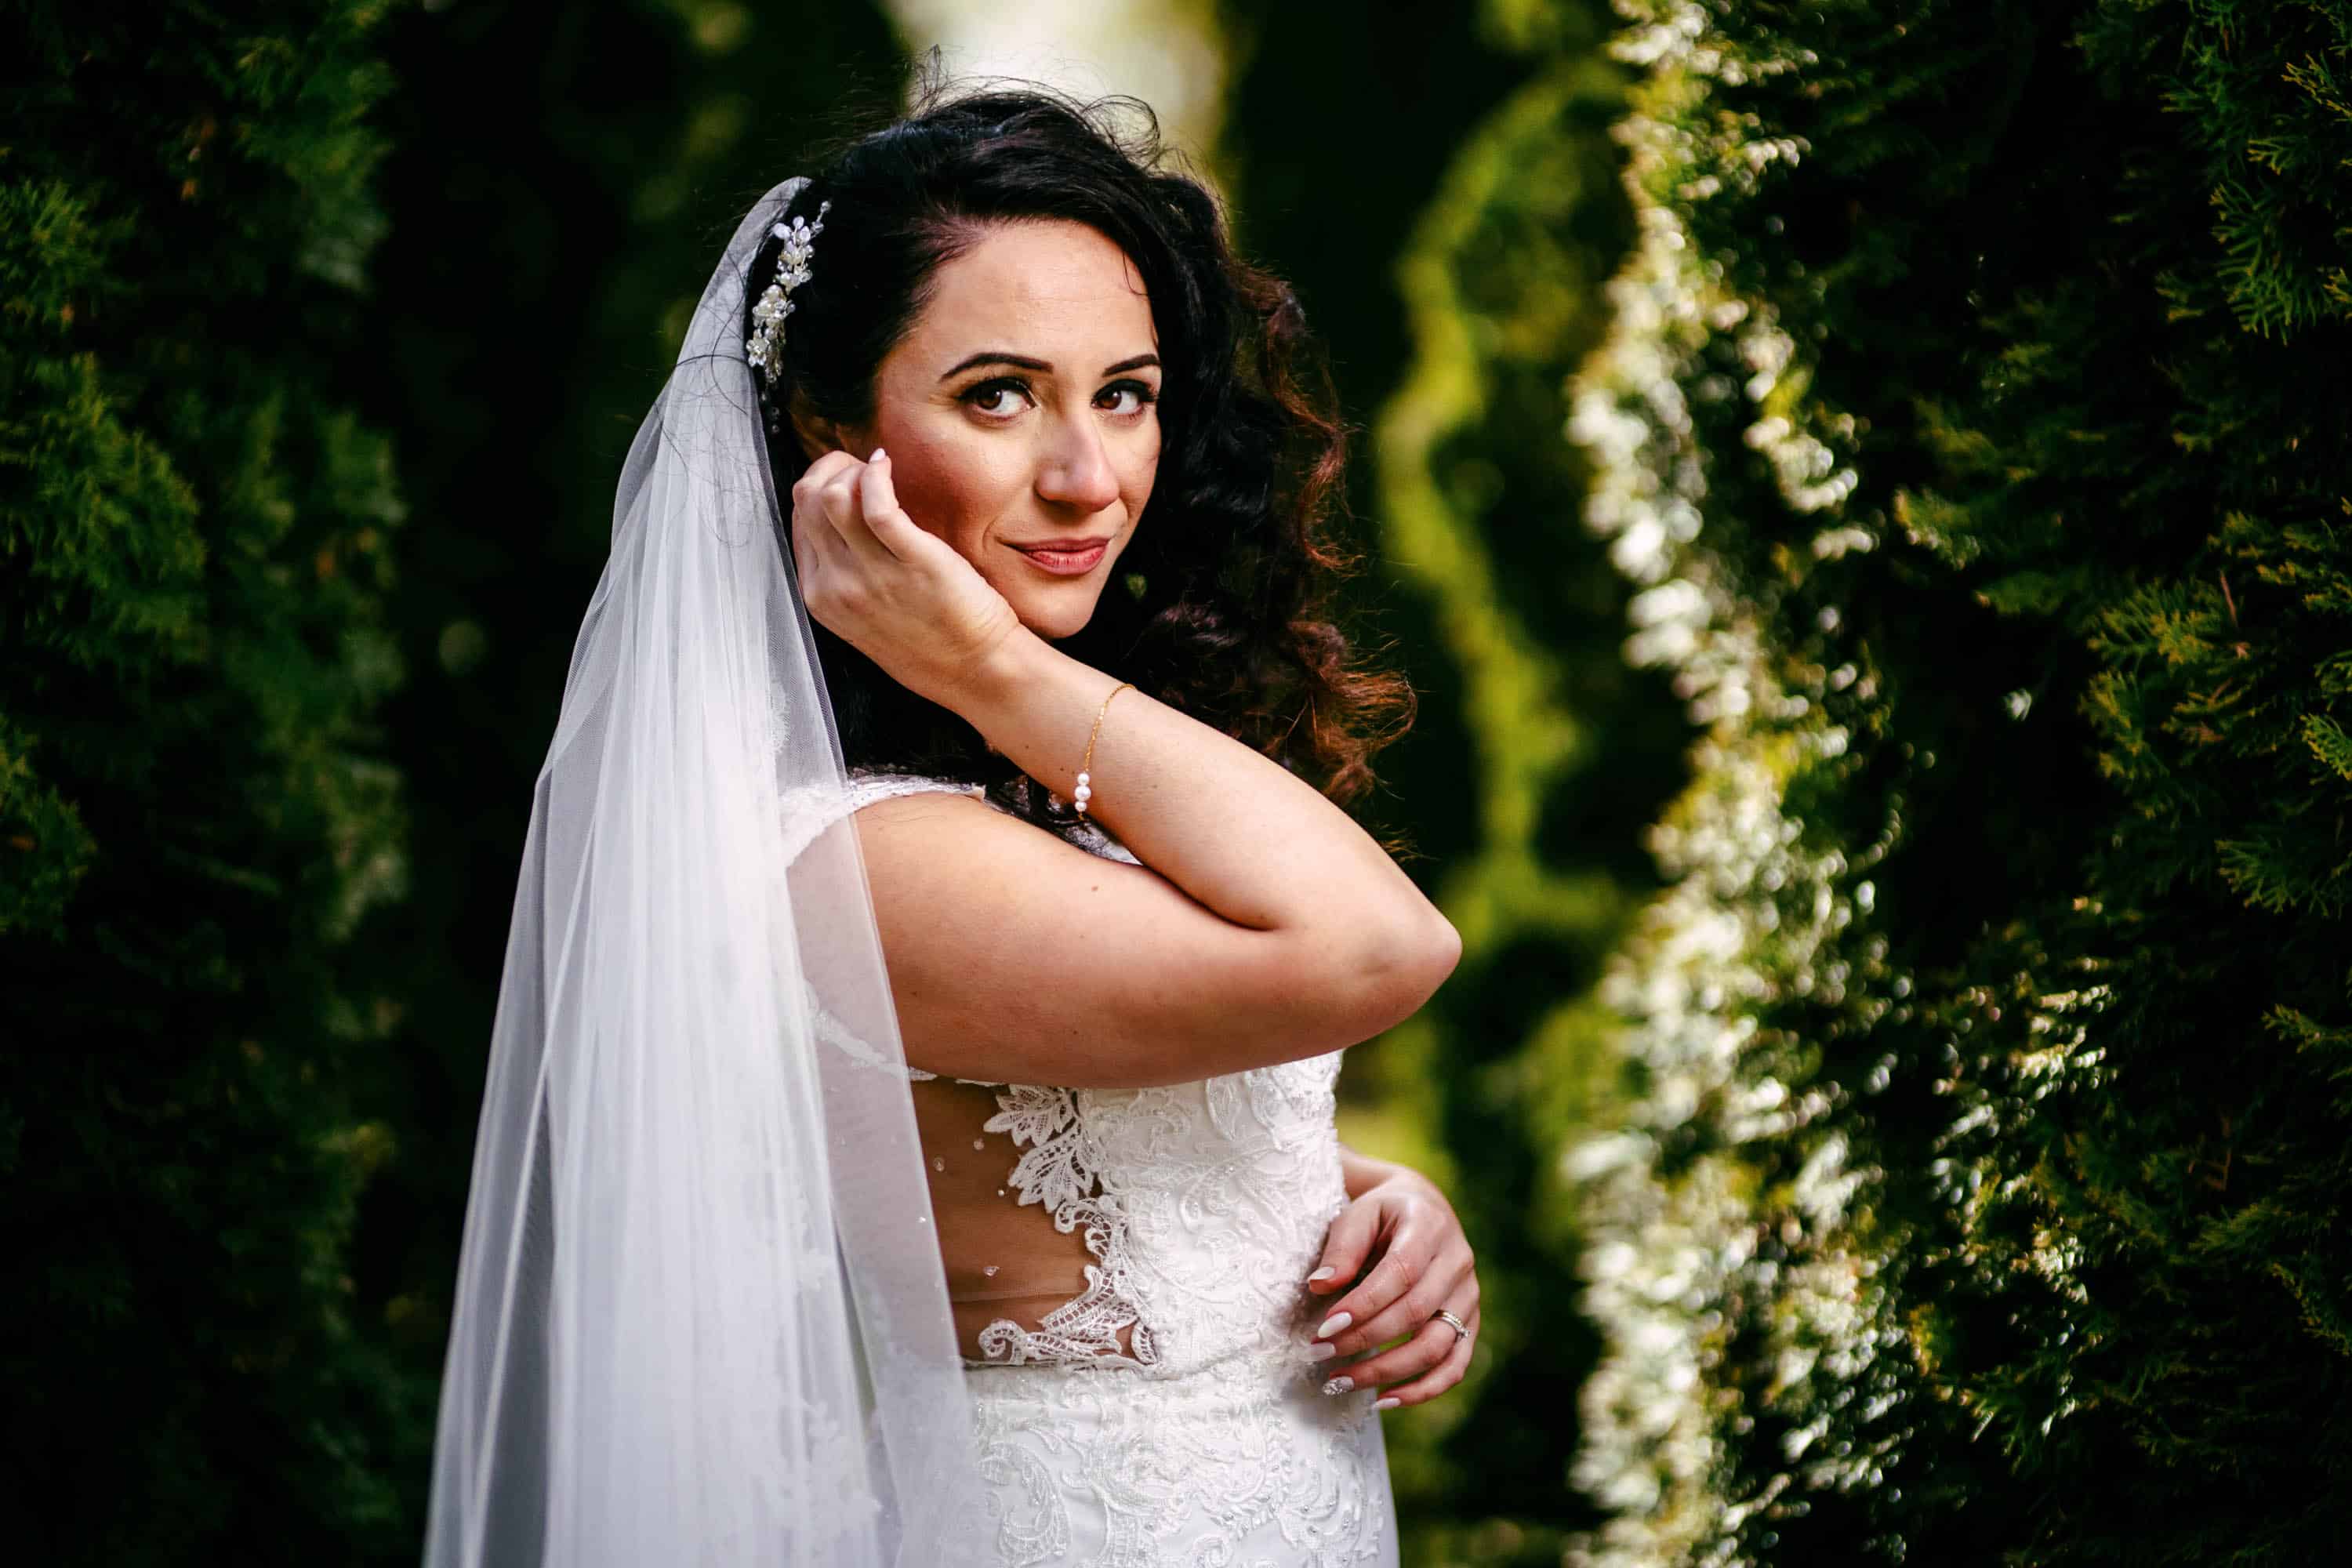 A bride poses for a photo in a grove of trees.